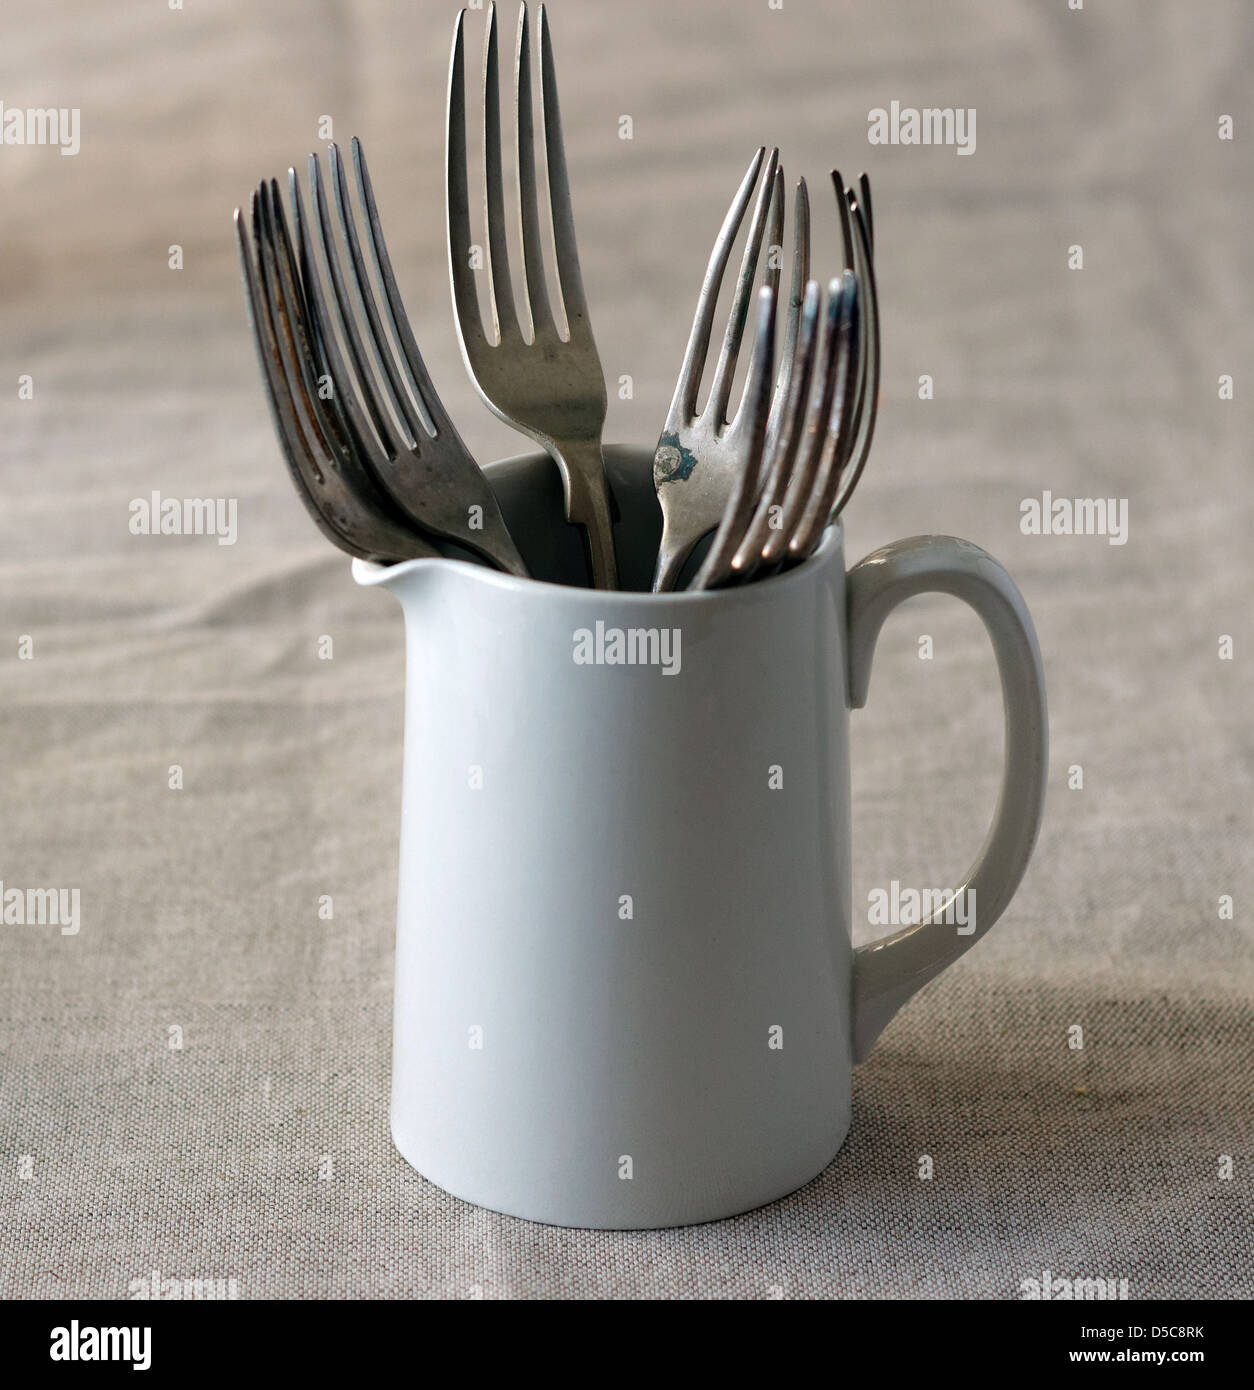 Forks in a jug Stock Photo